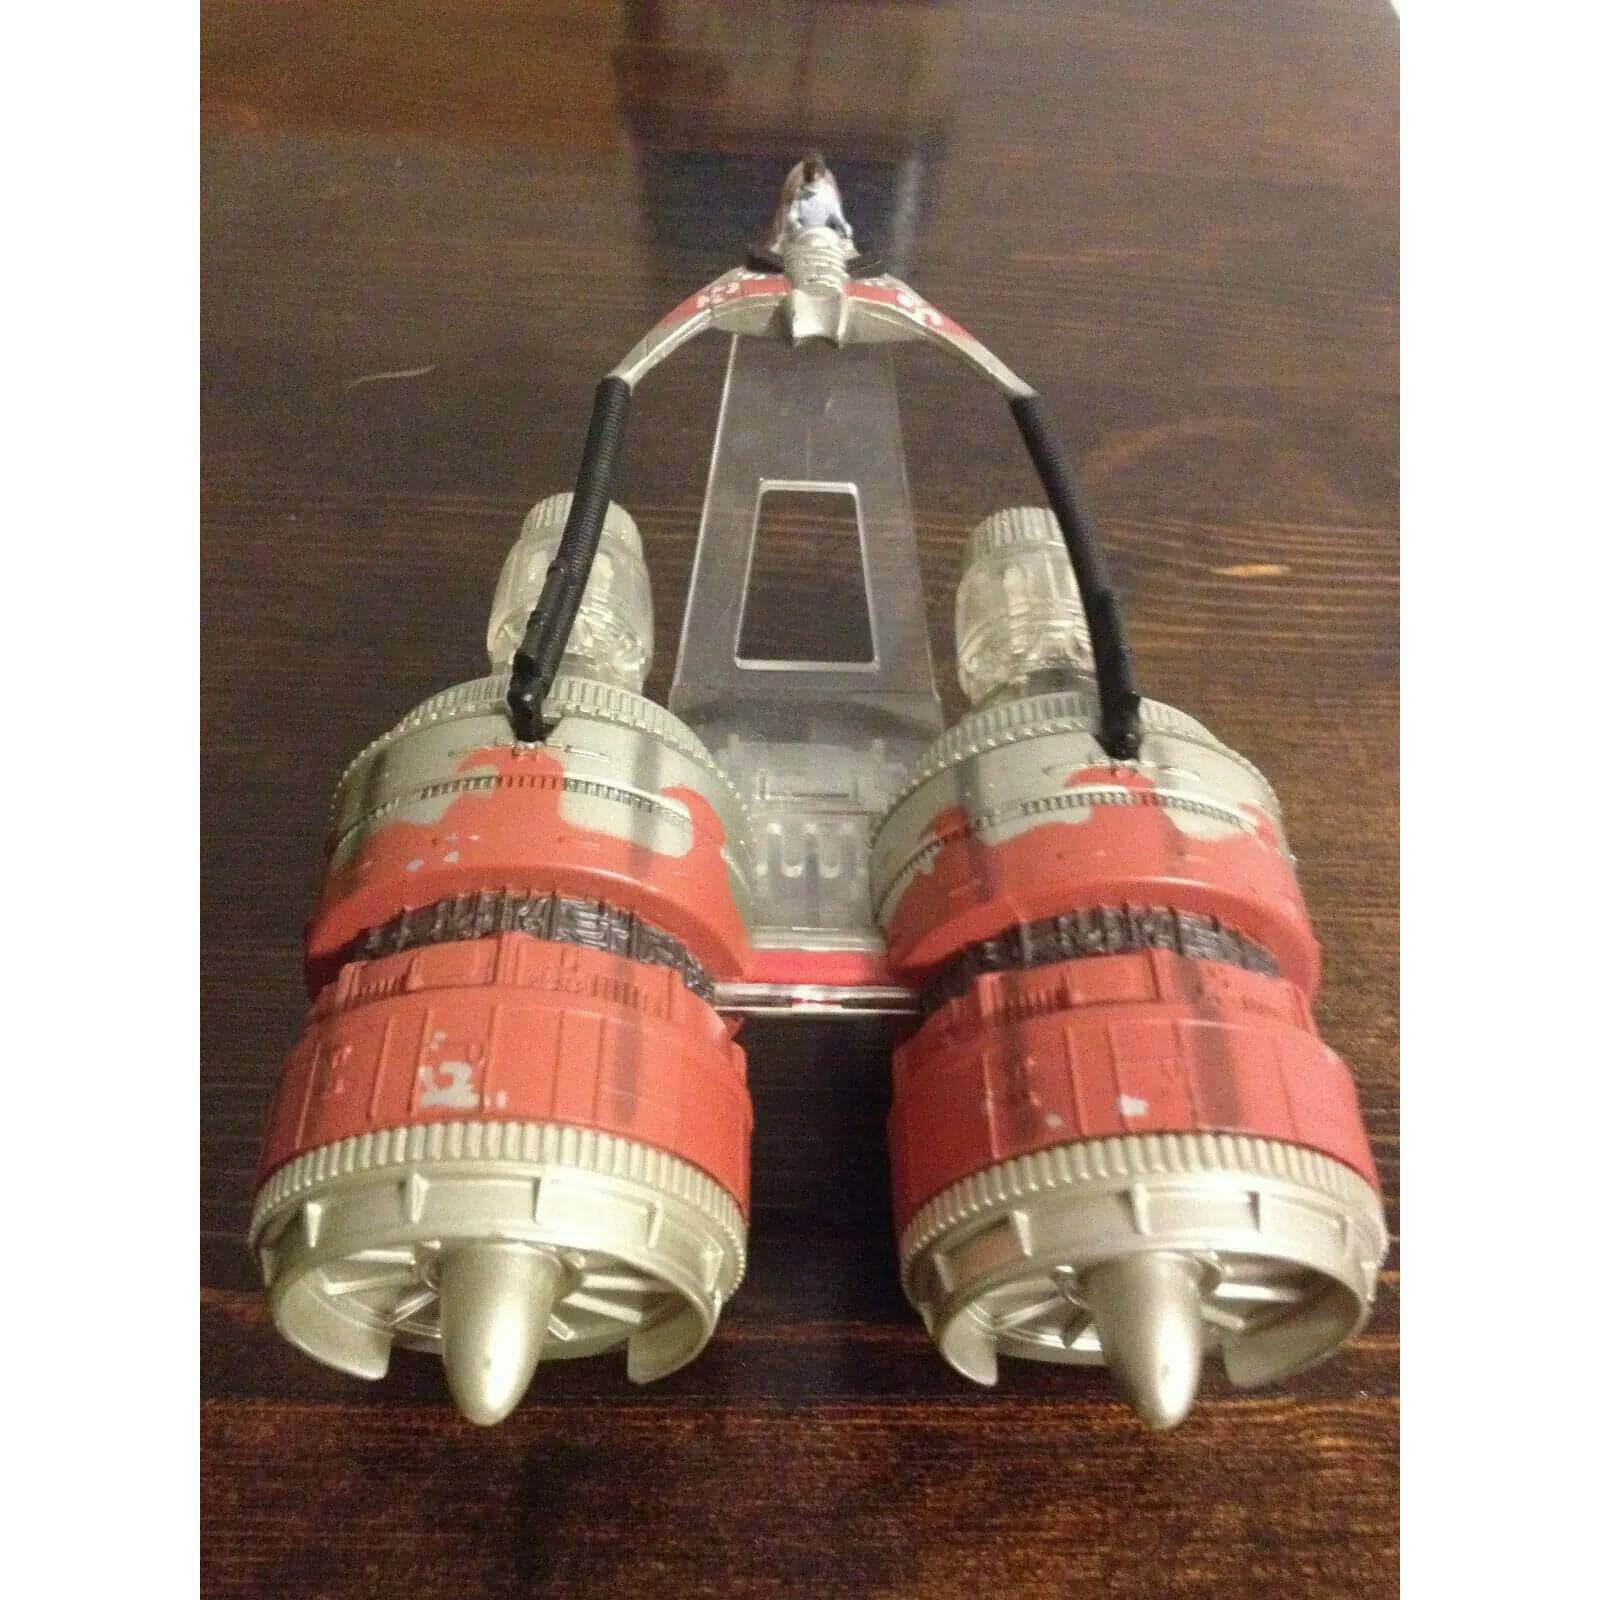 Star Wars Pod Racing Toys [PAIR-Toys Here!] BooksCardsNBikes